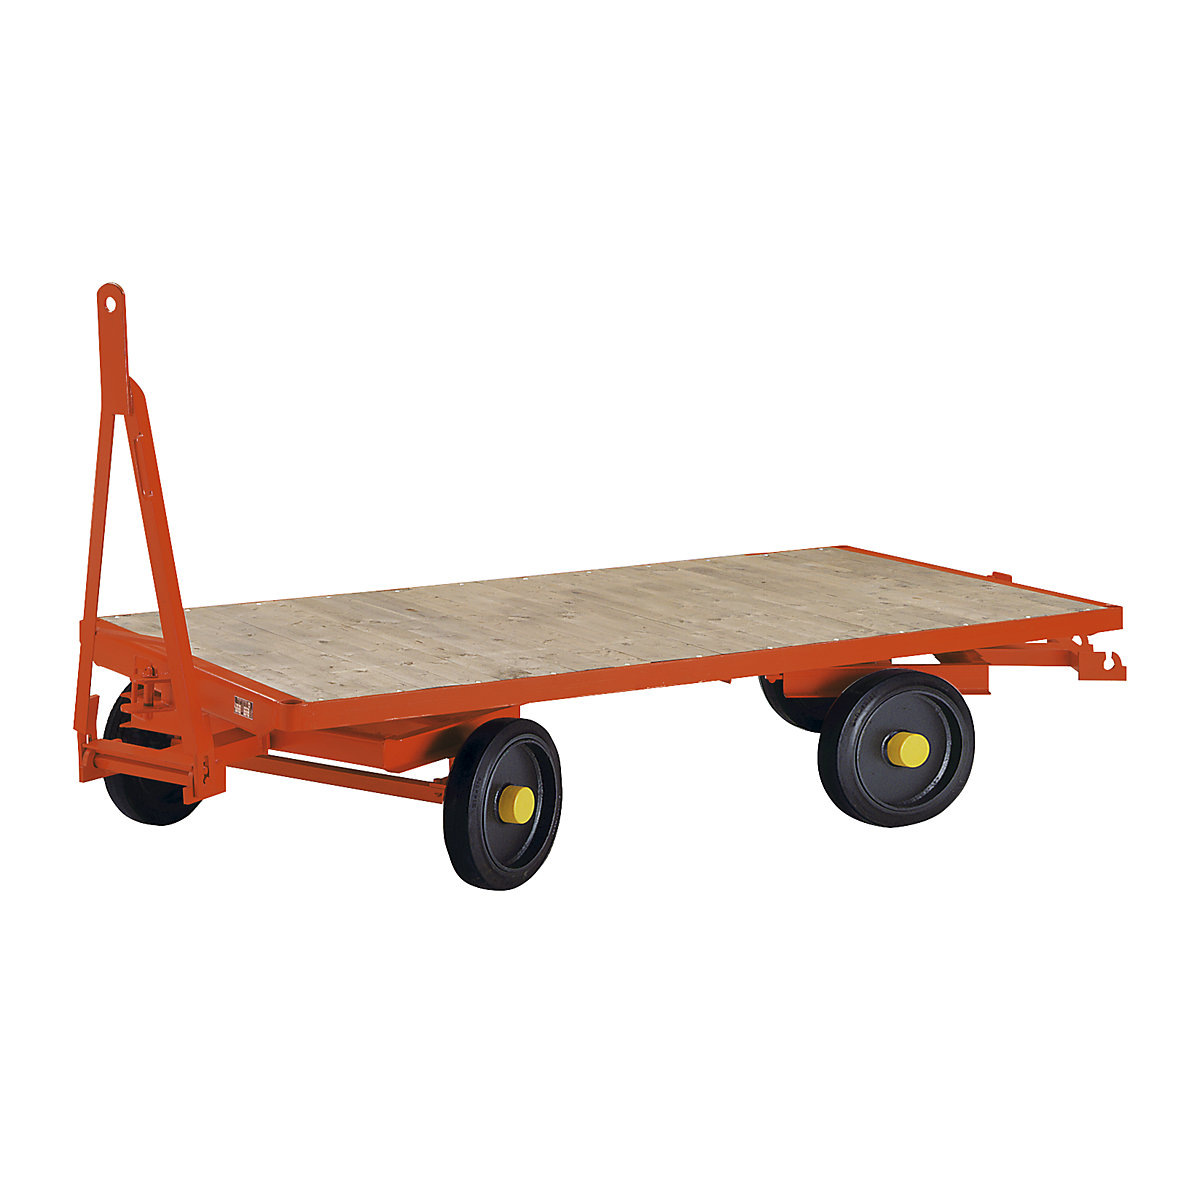 Trailer, 4-wheel double turntable steering, max. load 8 t, platform 4.0 x 2.0 m, solid rubber tyres